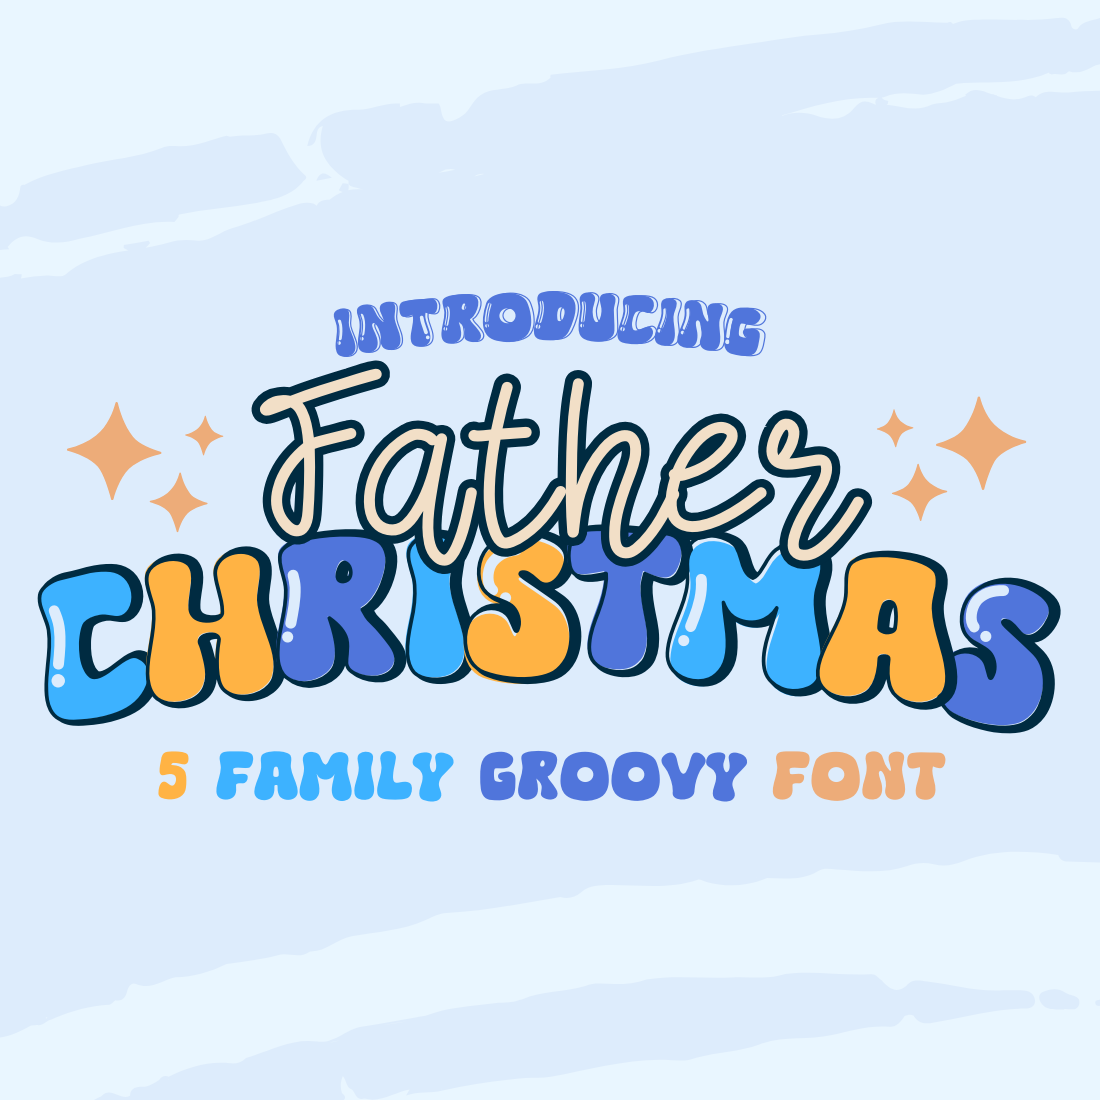 Father Christmas is a Groovy font cover image.